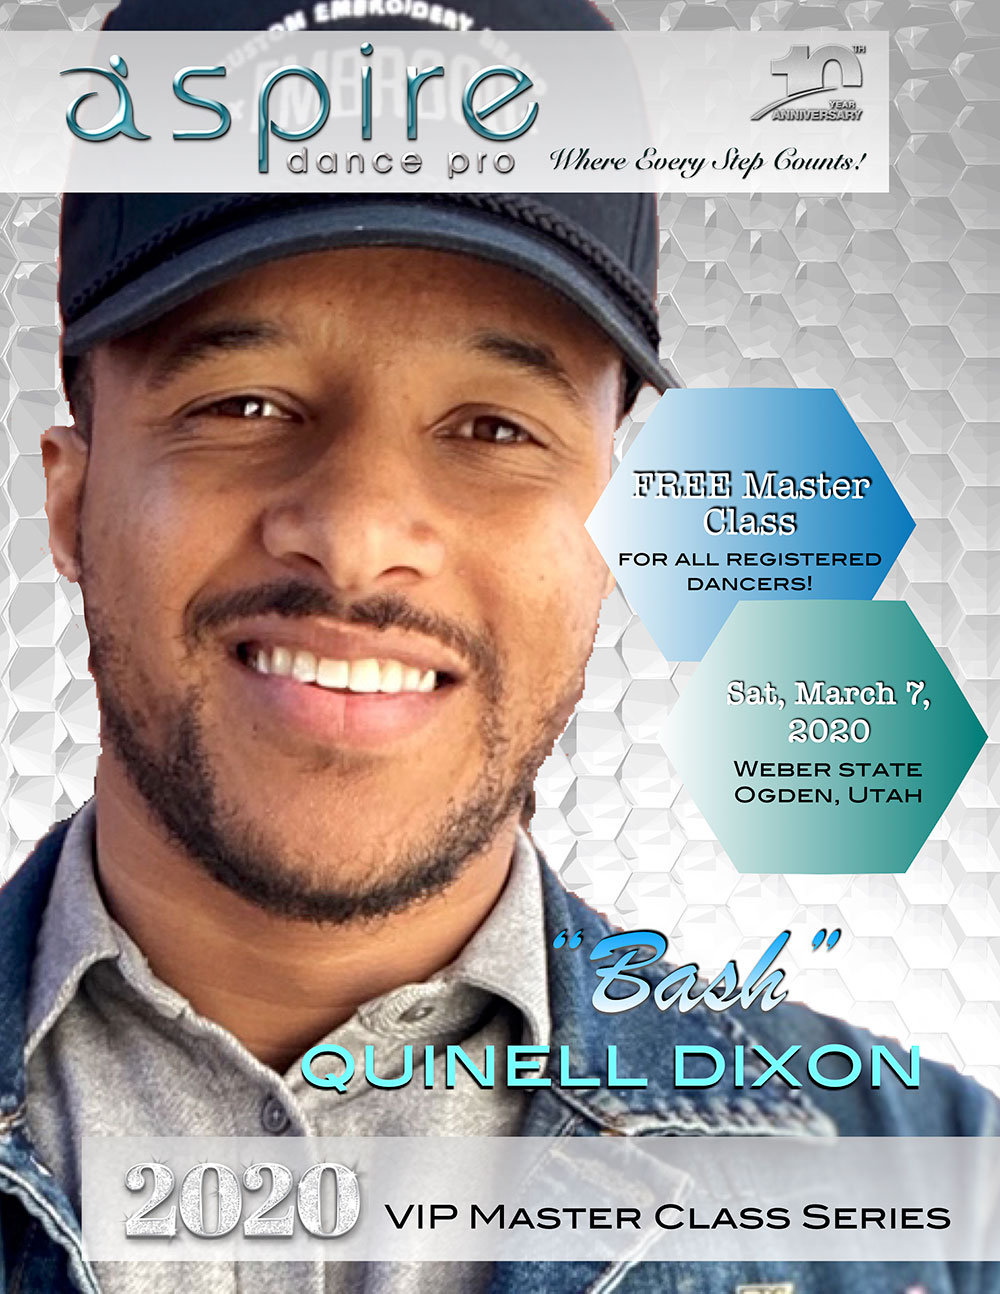 Quinell Dixon - Aspire Dance Pro Competitions VIP Masterclass Instructor